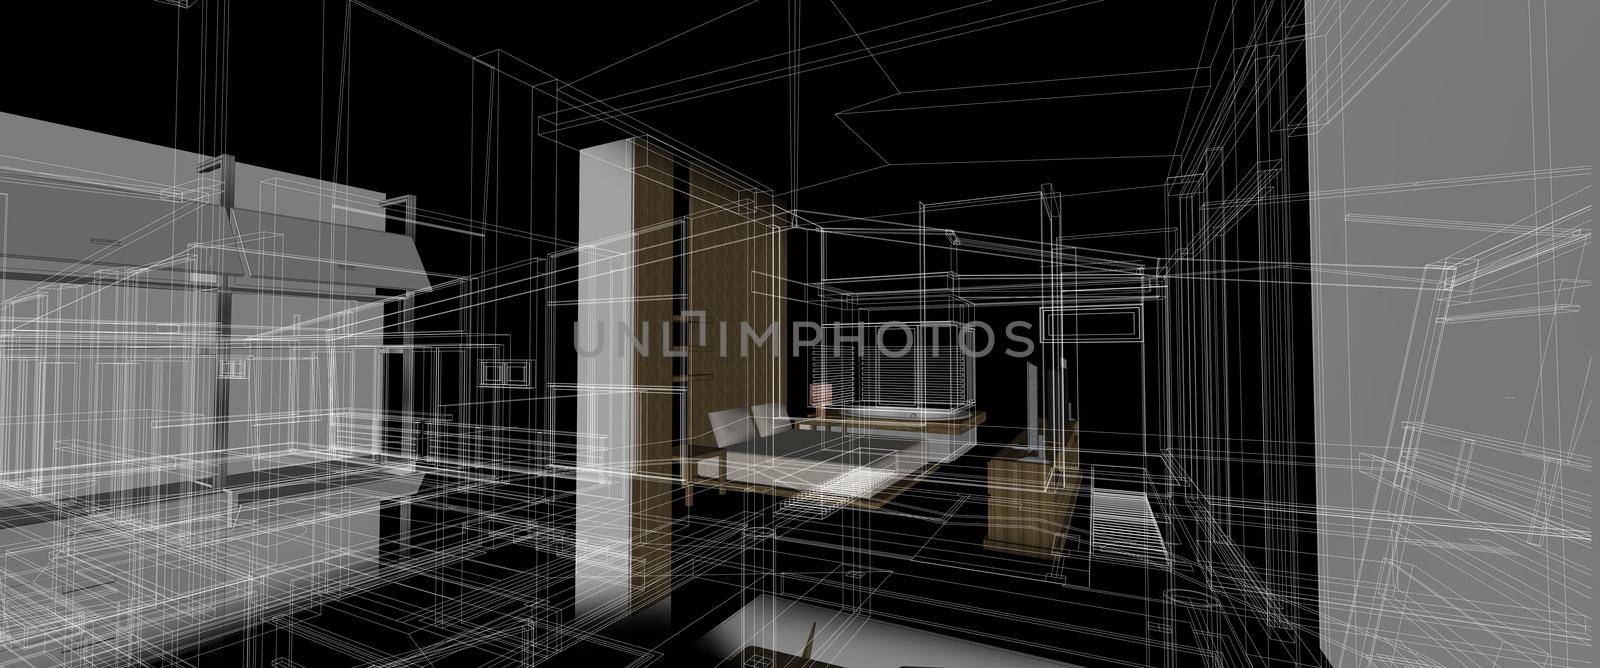 architecture interior furniture design concept 3d perspective wire frame rendering black background. For abstract background or wallpaper desktops architecture theme